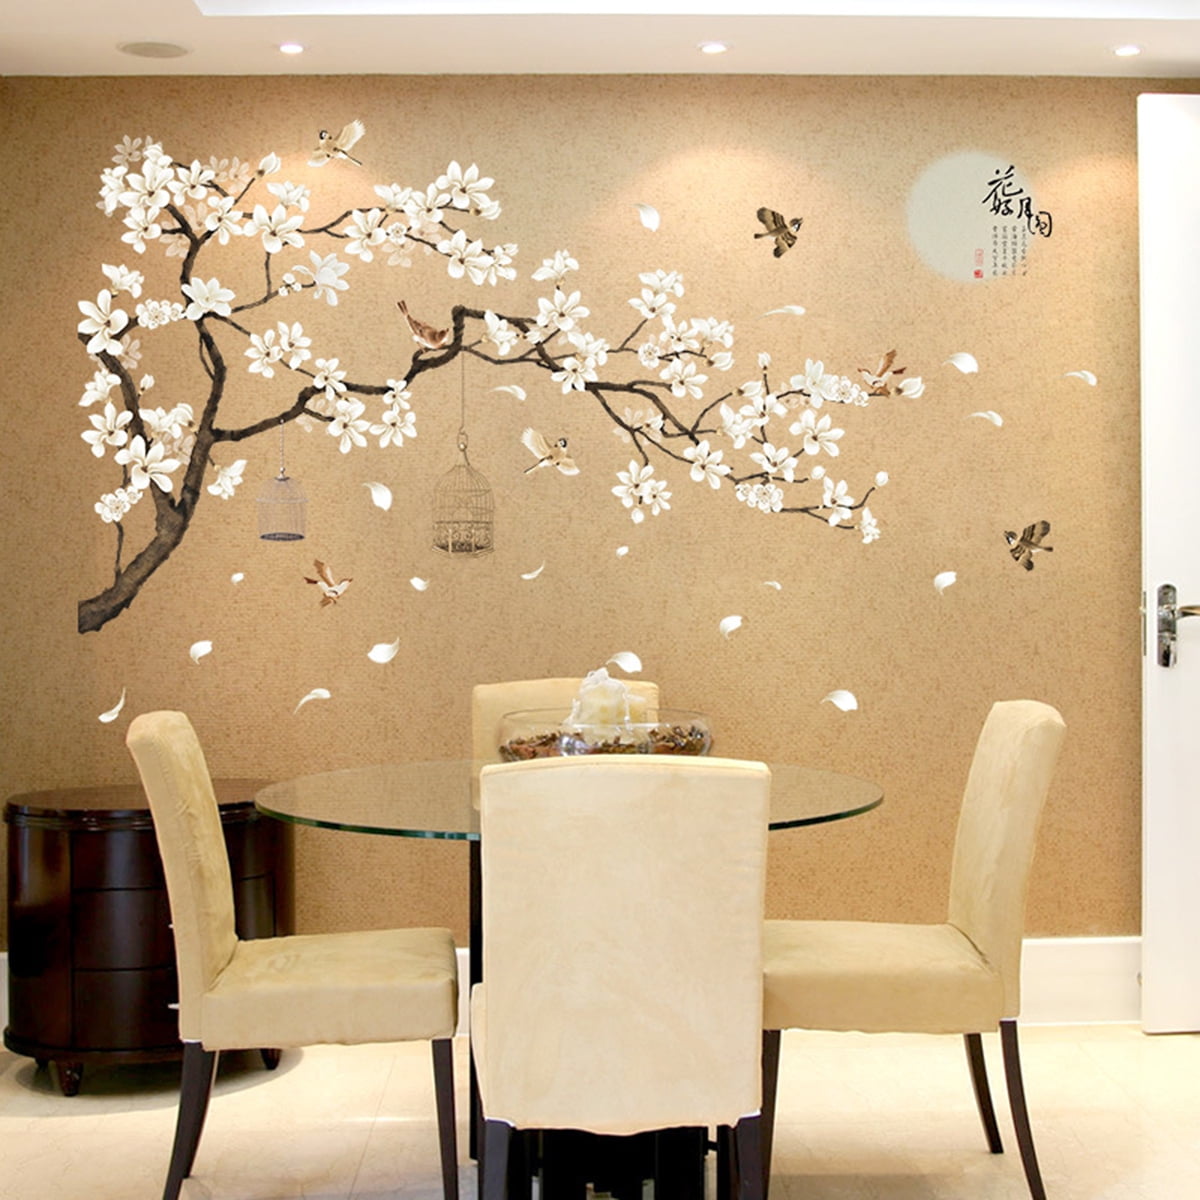 Large Cherry Blossom Flower Birds Tree Wall Stickers Art Decal Home Decor DIY 